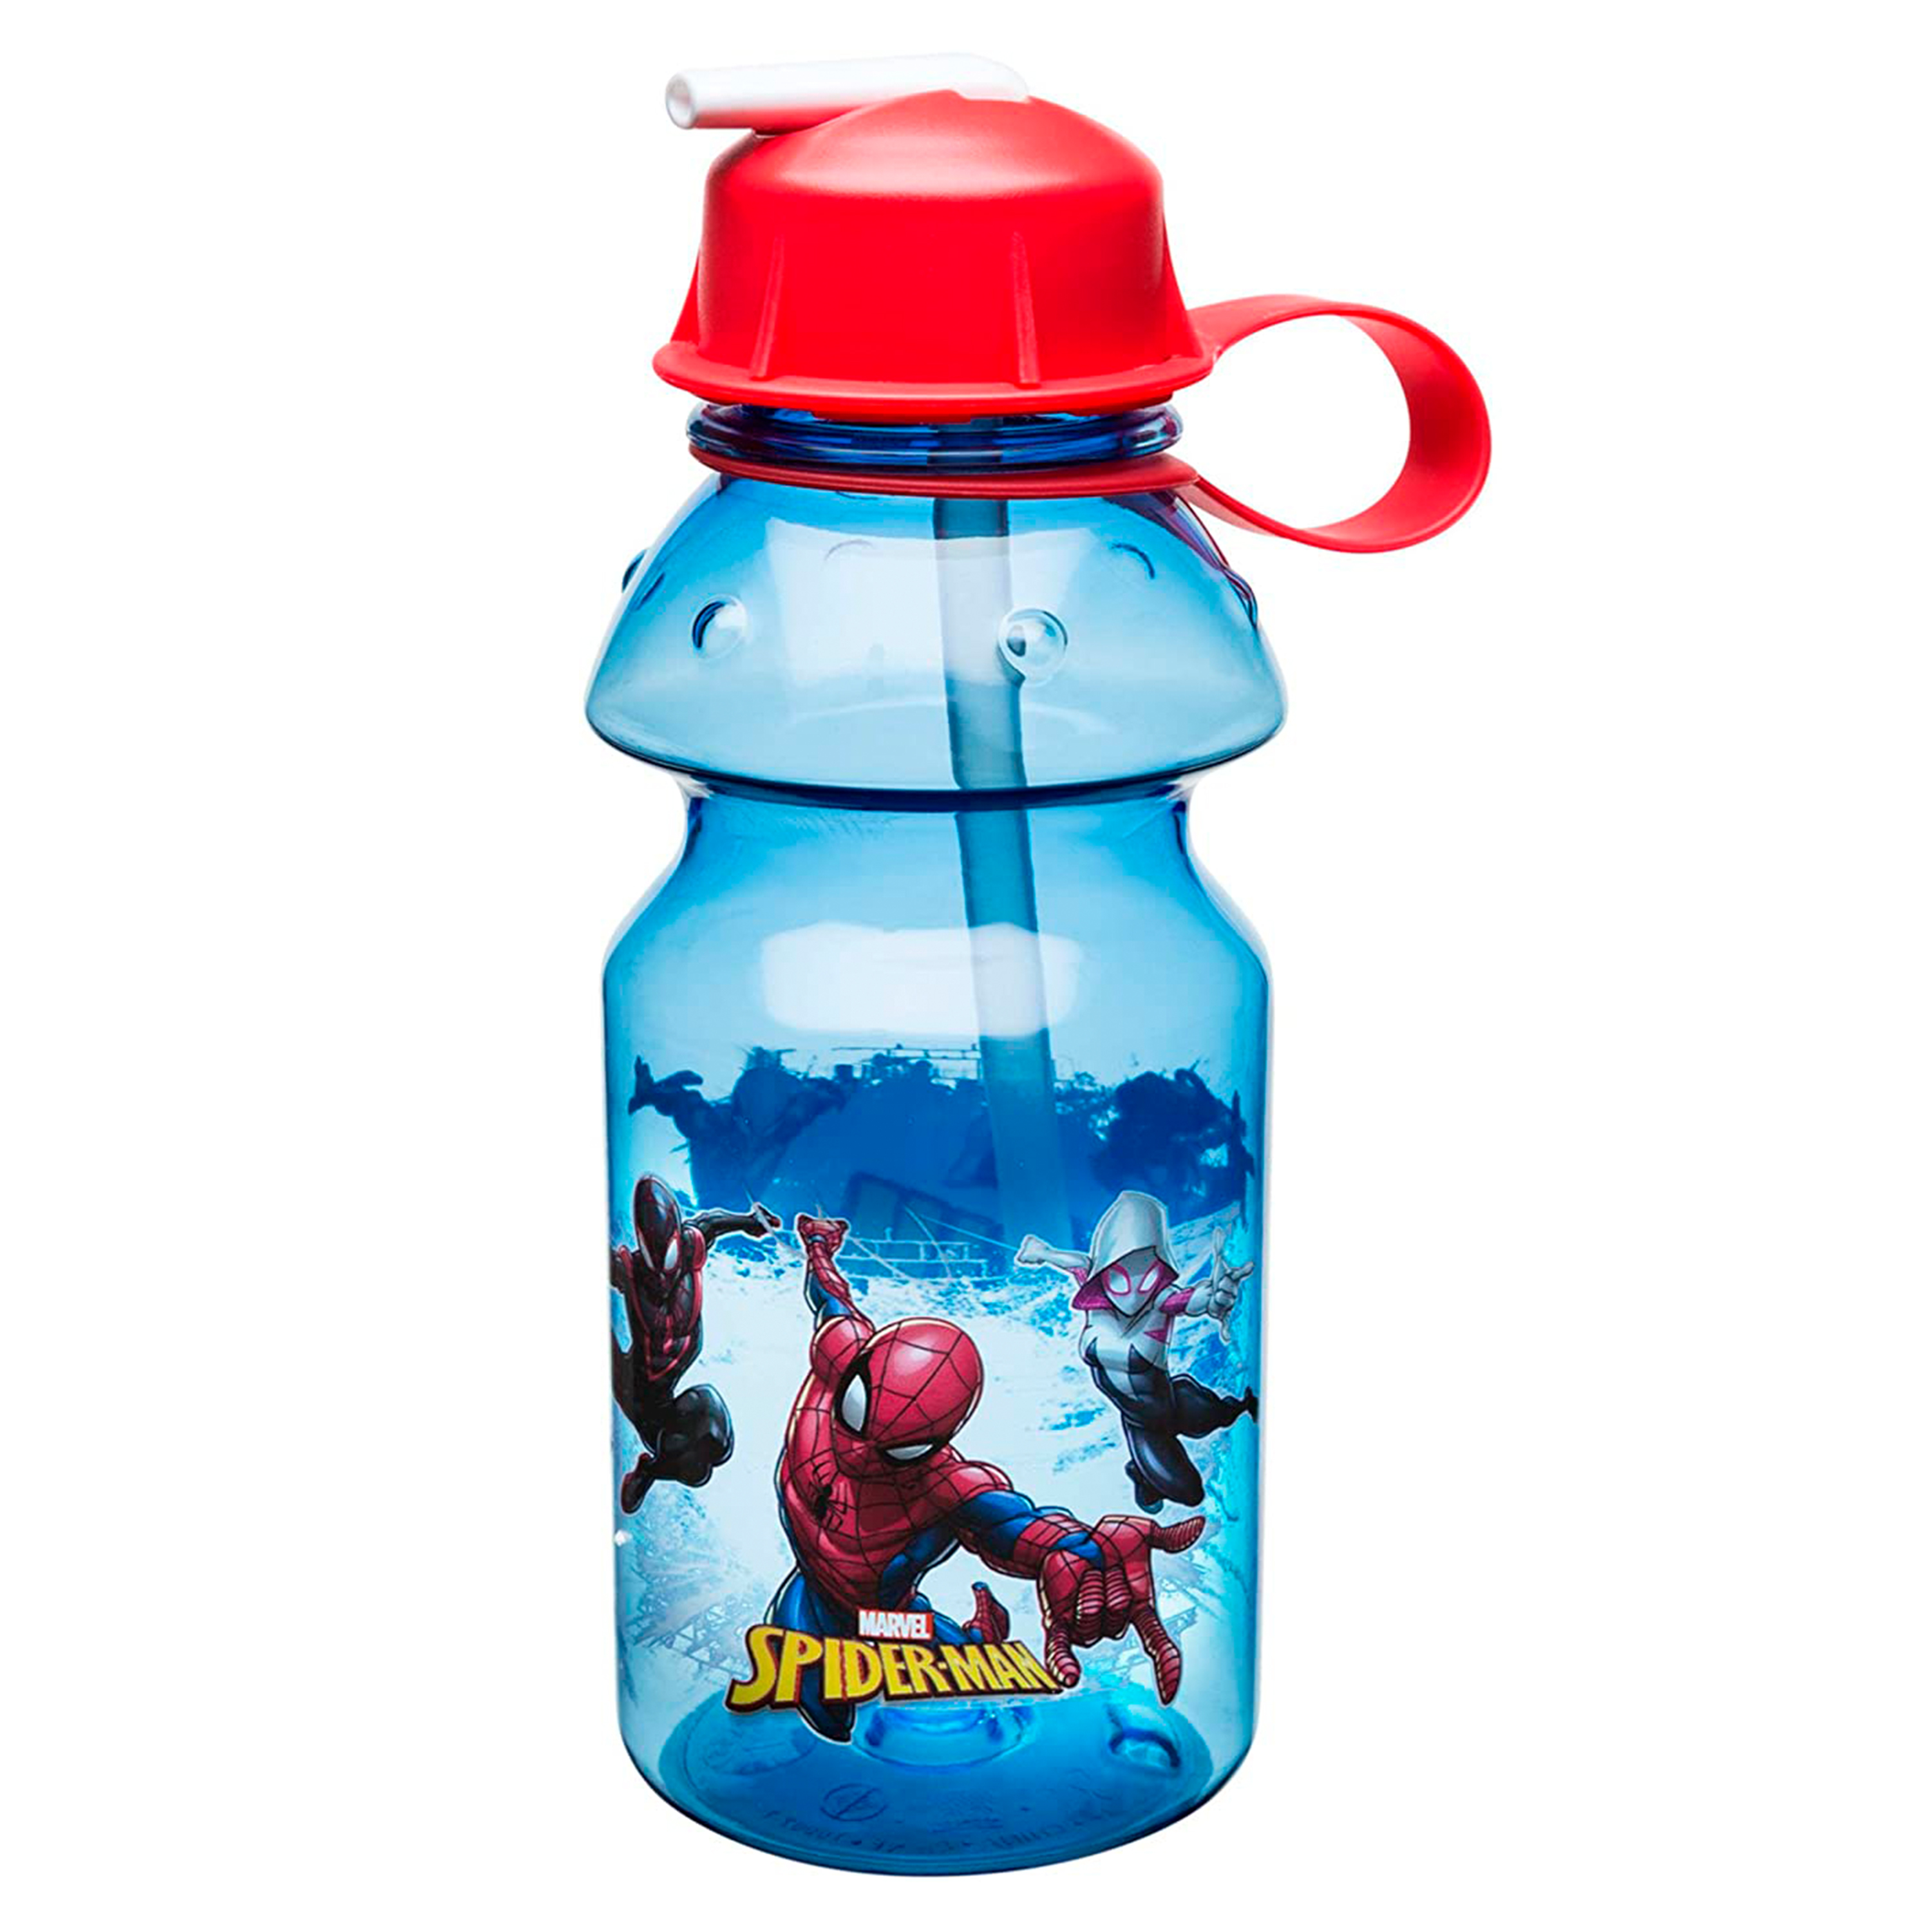 Zak Designs Marvel Comics Spider-Man Kids Water Bottle with Straw and Built-in Carrying Loop, Durable Bottle Has Wide Mouth and Break Resistant Design is Perfect for Kids (14oz, Tritan, BPA-Free) - image 1 of 2